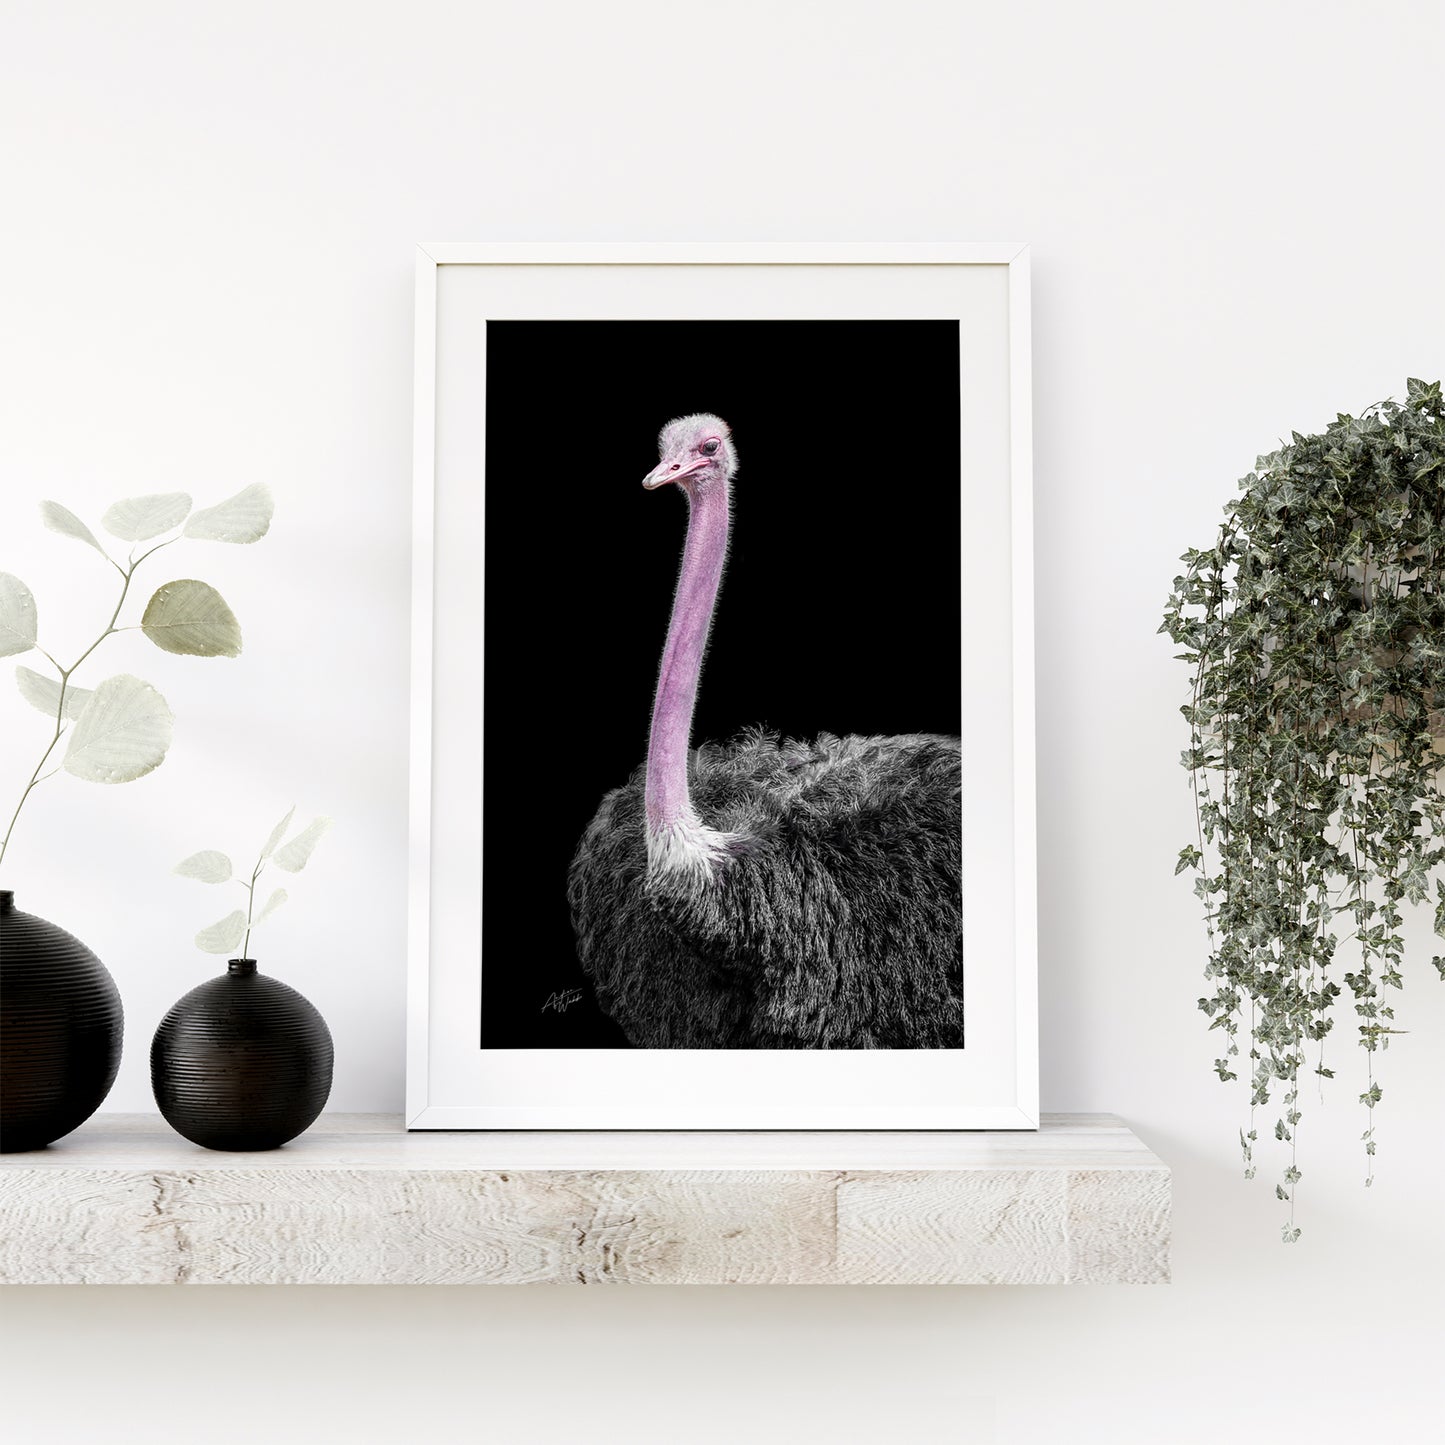 Ostrich face and partial body on a black background fine art portrait as living room decor. Ostrich photography. Ostrich art. Ostrich prints. Ostrich canvases. Ostrich wall art. Ostrich gifts. Animal Photography